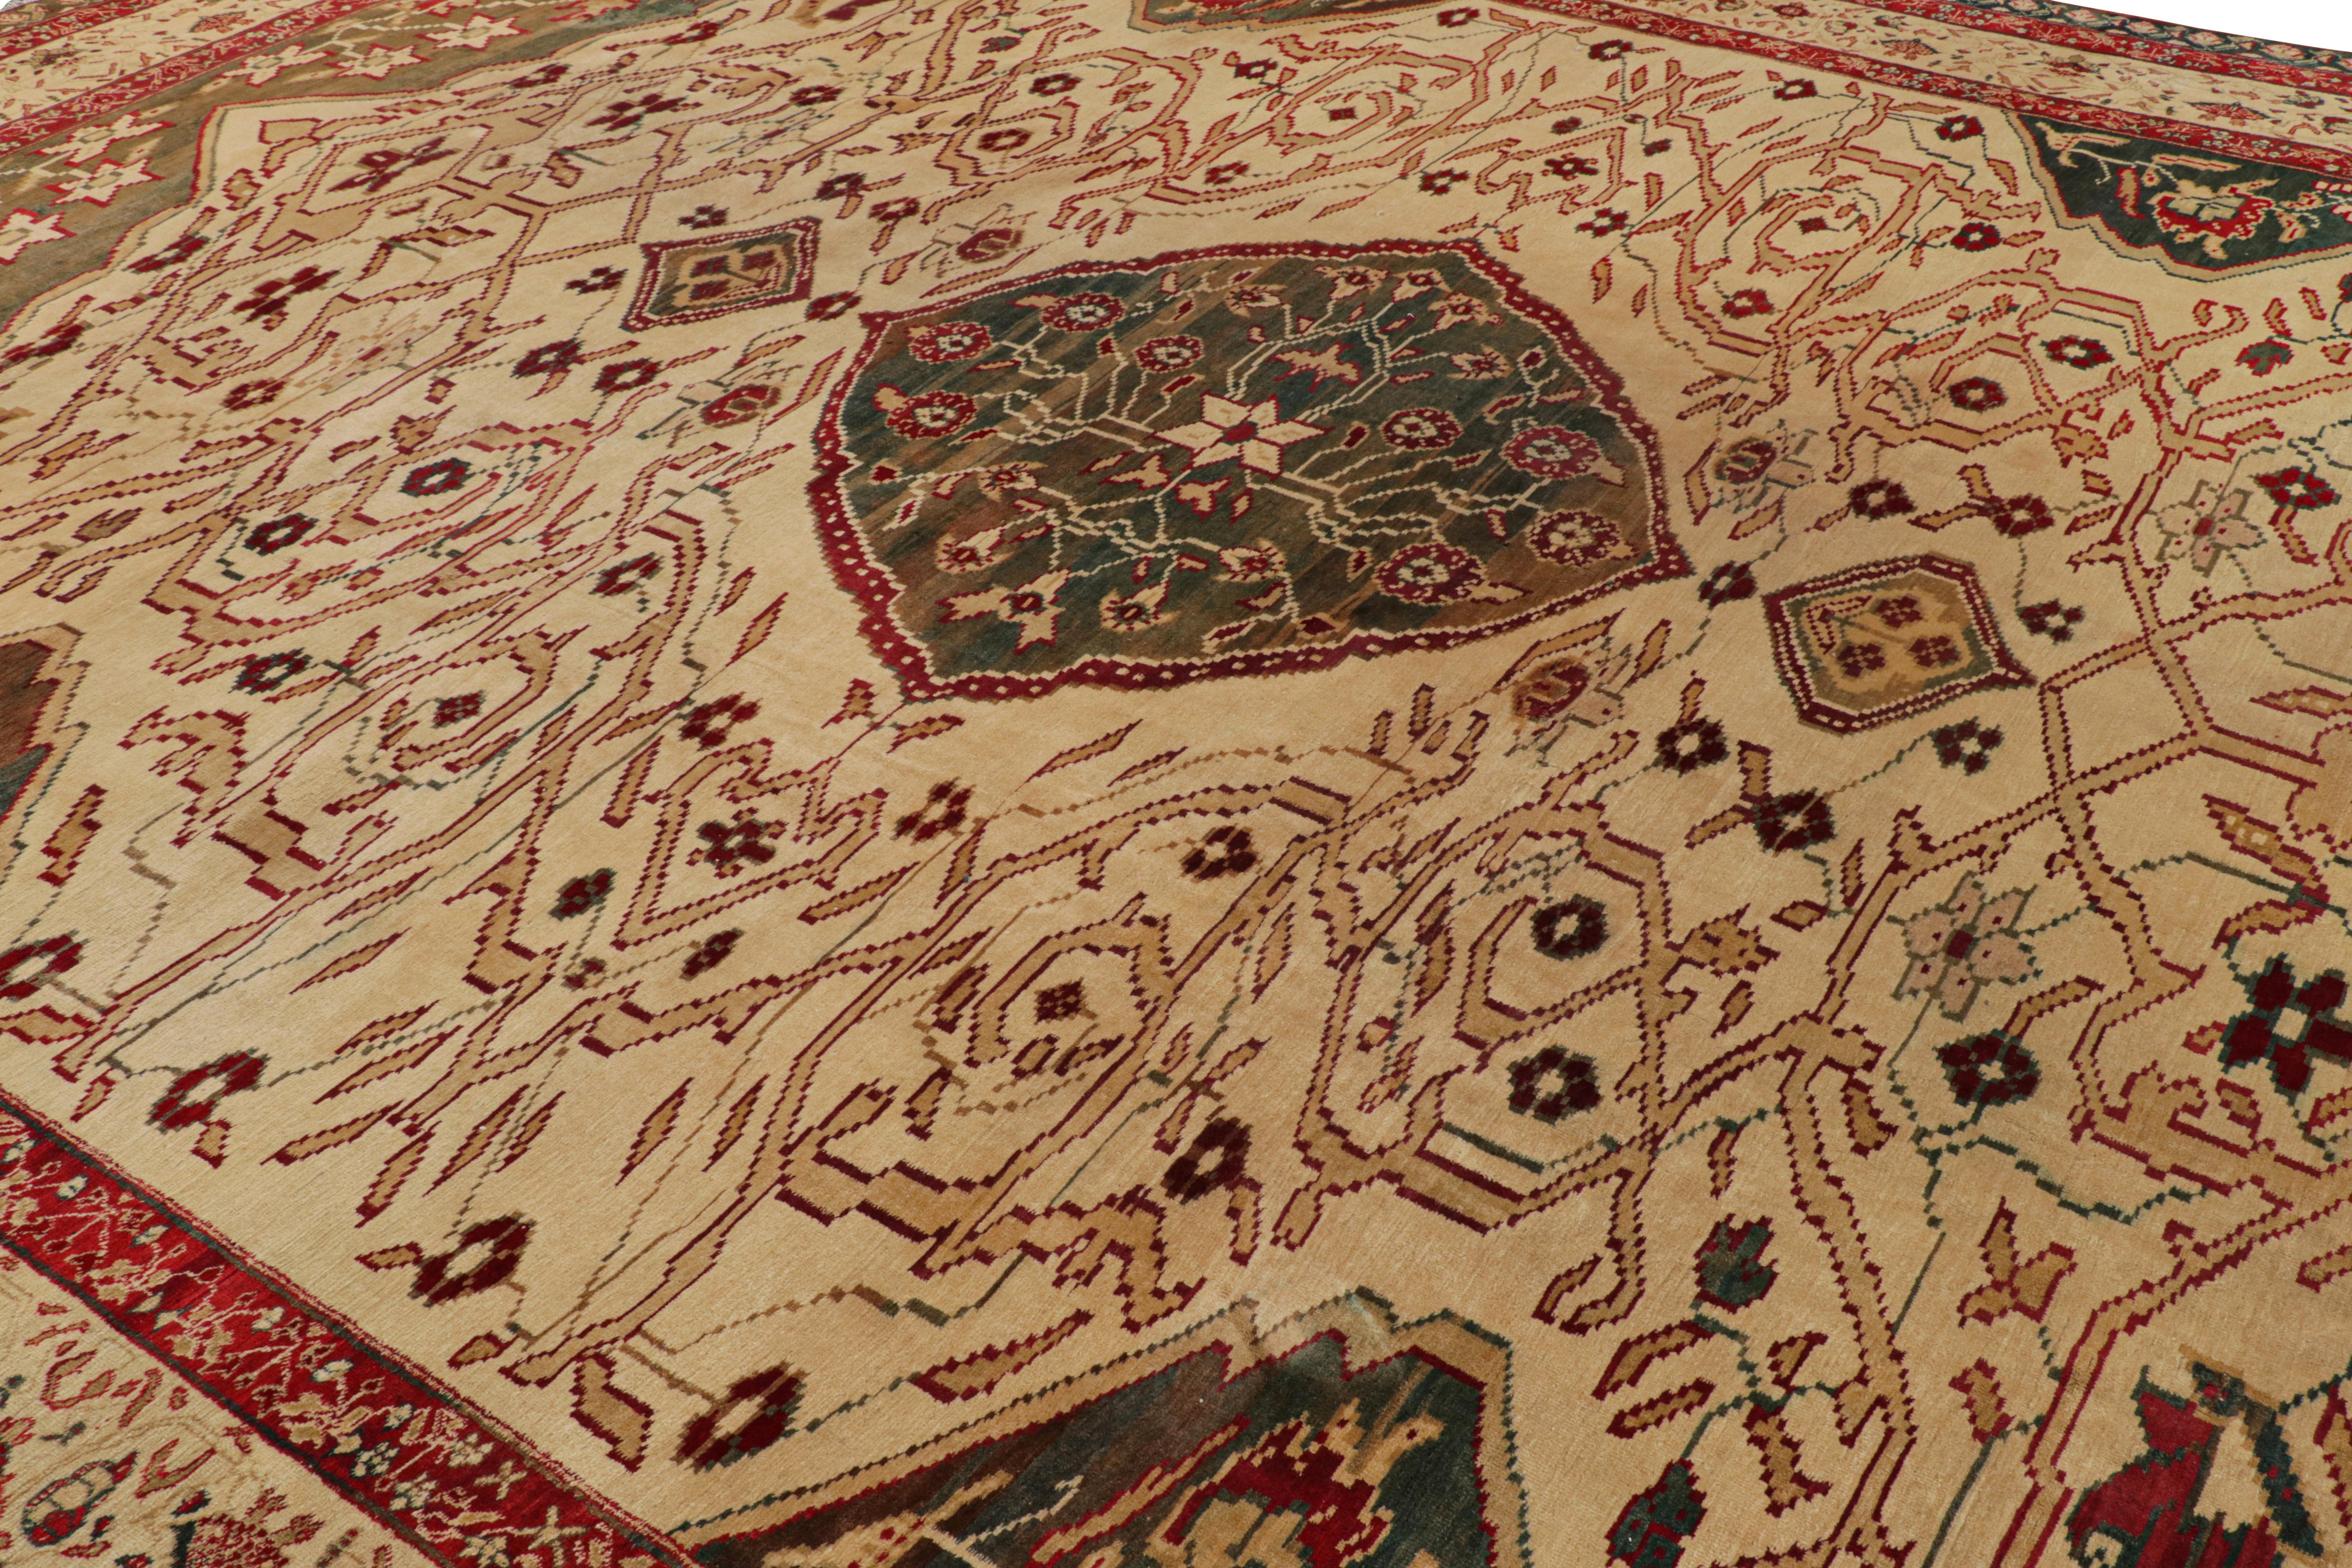 Hand-knotted in wool, originating from India circa 1920-1930, this oversized 13x16 special Agra Jail rug features a play of all-over floral and medallion style together.

On the Design

Connoisseurs will admire this outstanding oversized antique